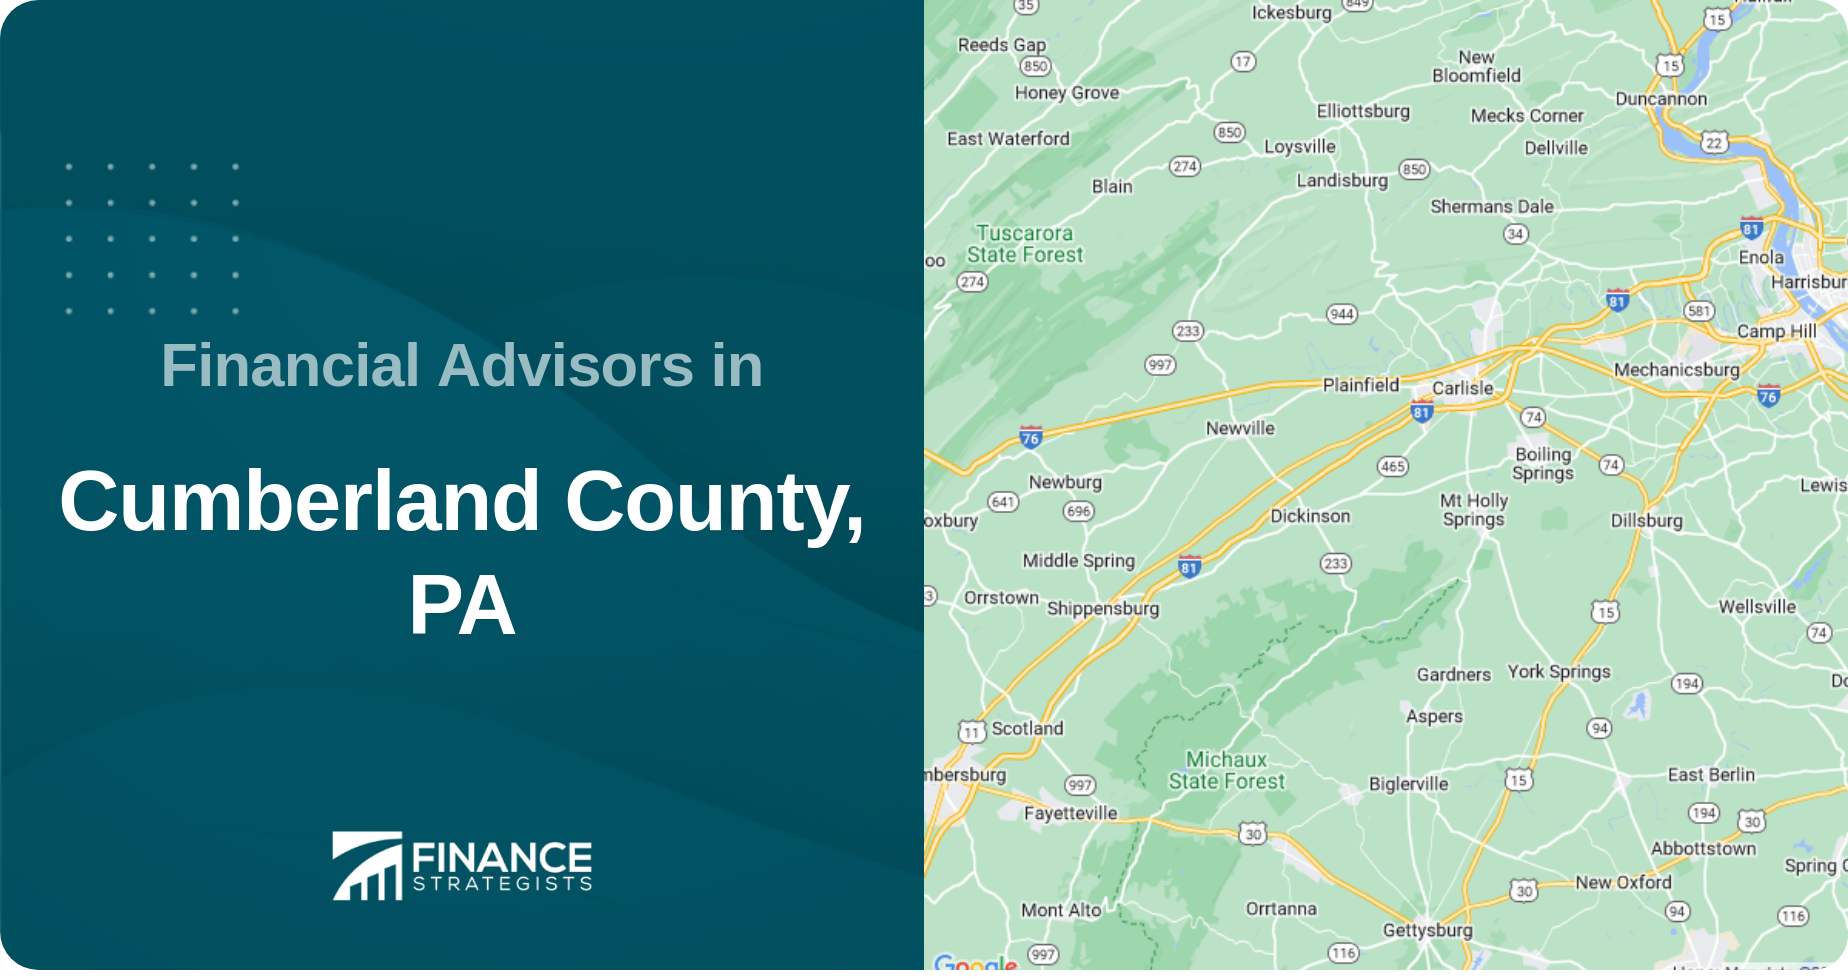 Financial Advisors in Cumberland County, PA